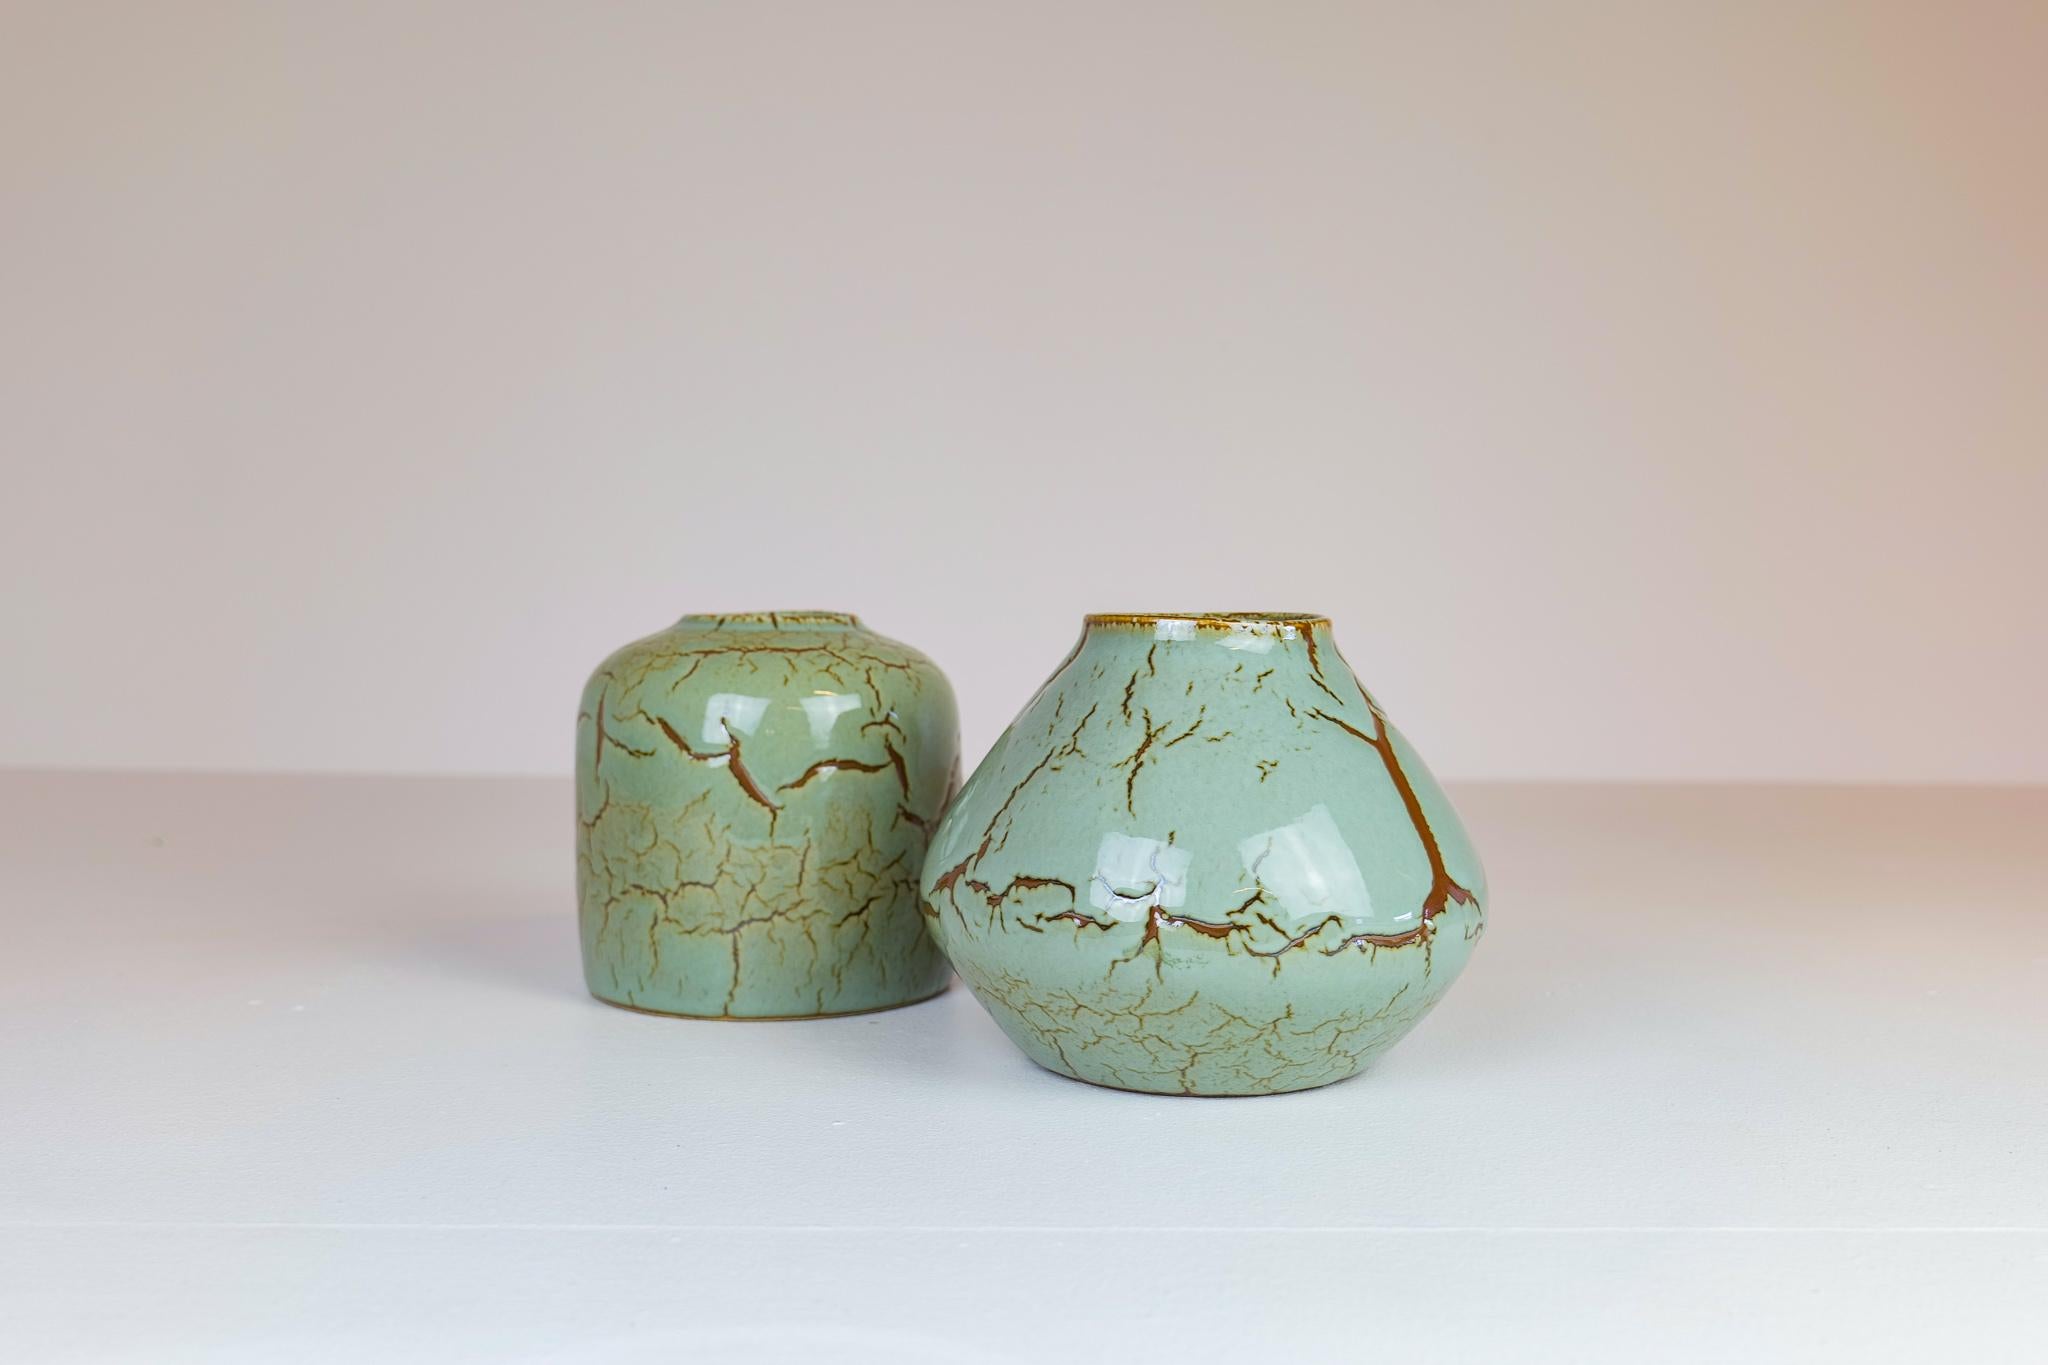 These pieces of ceramics were made in Sweden 1950s for Rörstrand and designed by one of the great ceramic’s designers from Sweden, Carl-Harry Stålhane. There is a stunning nice light green color with unique cracked brown glaze. Even though so unique